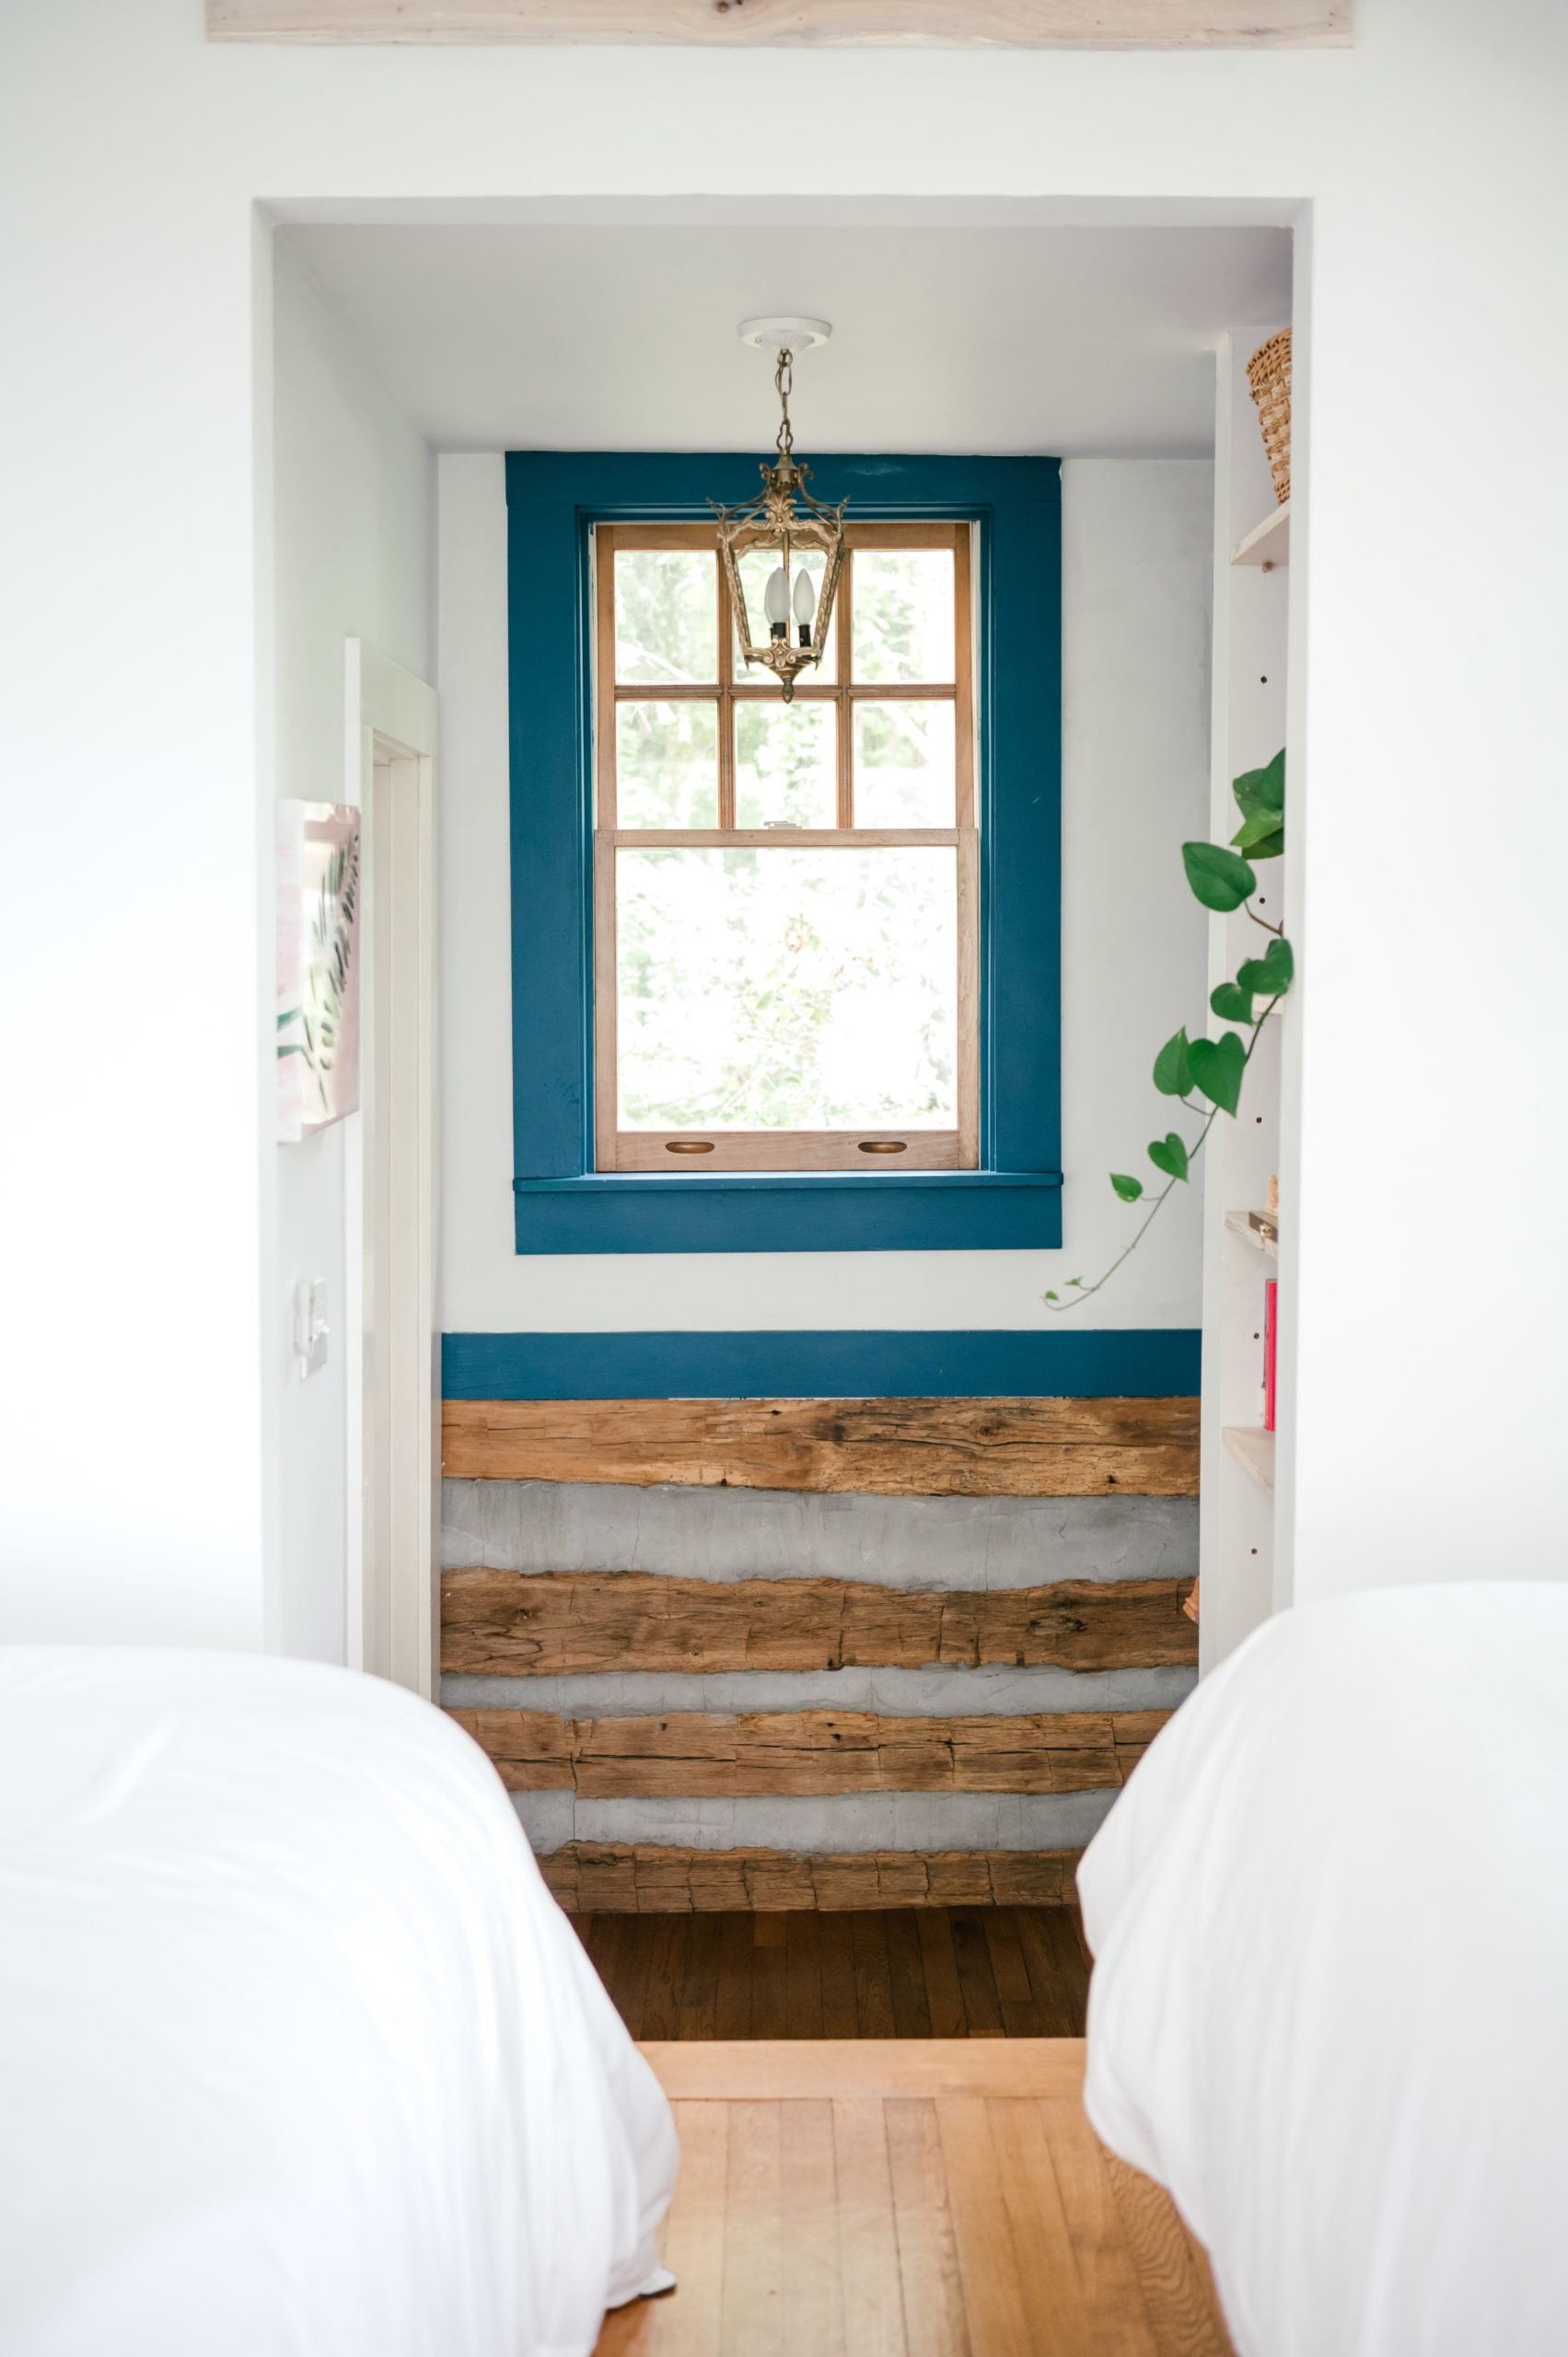 Professional Airbnb photography of air bnb cabin entryway with beautiful window lined with blue paint